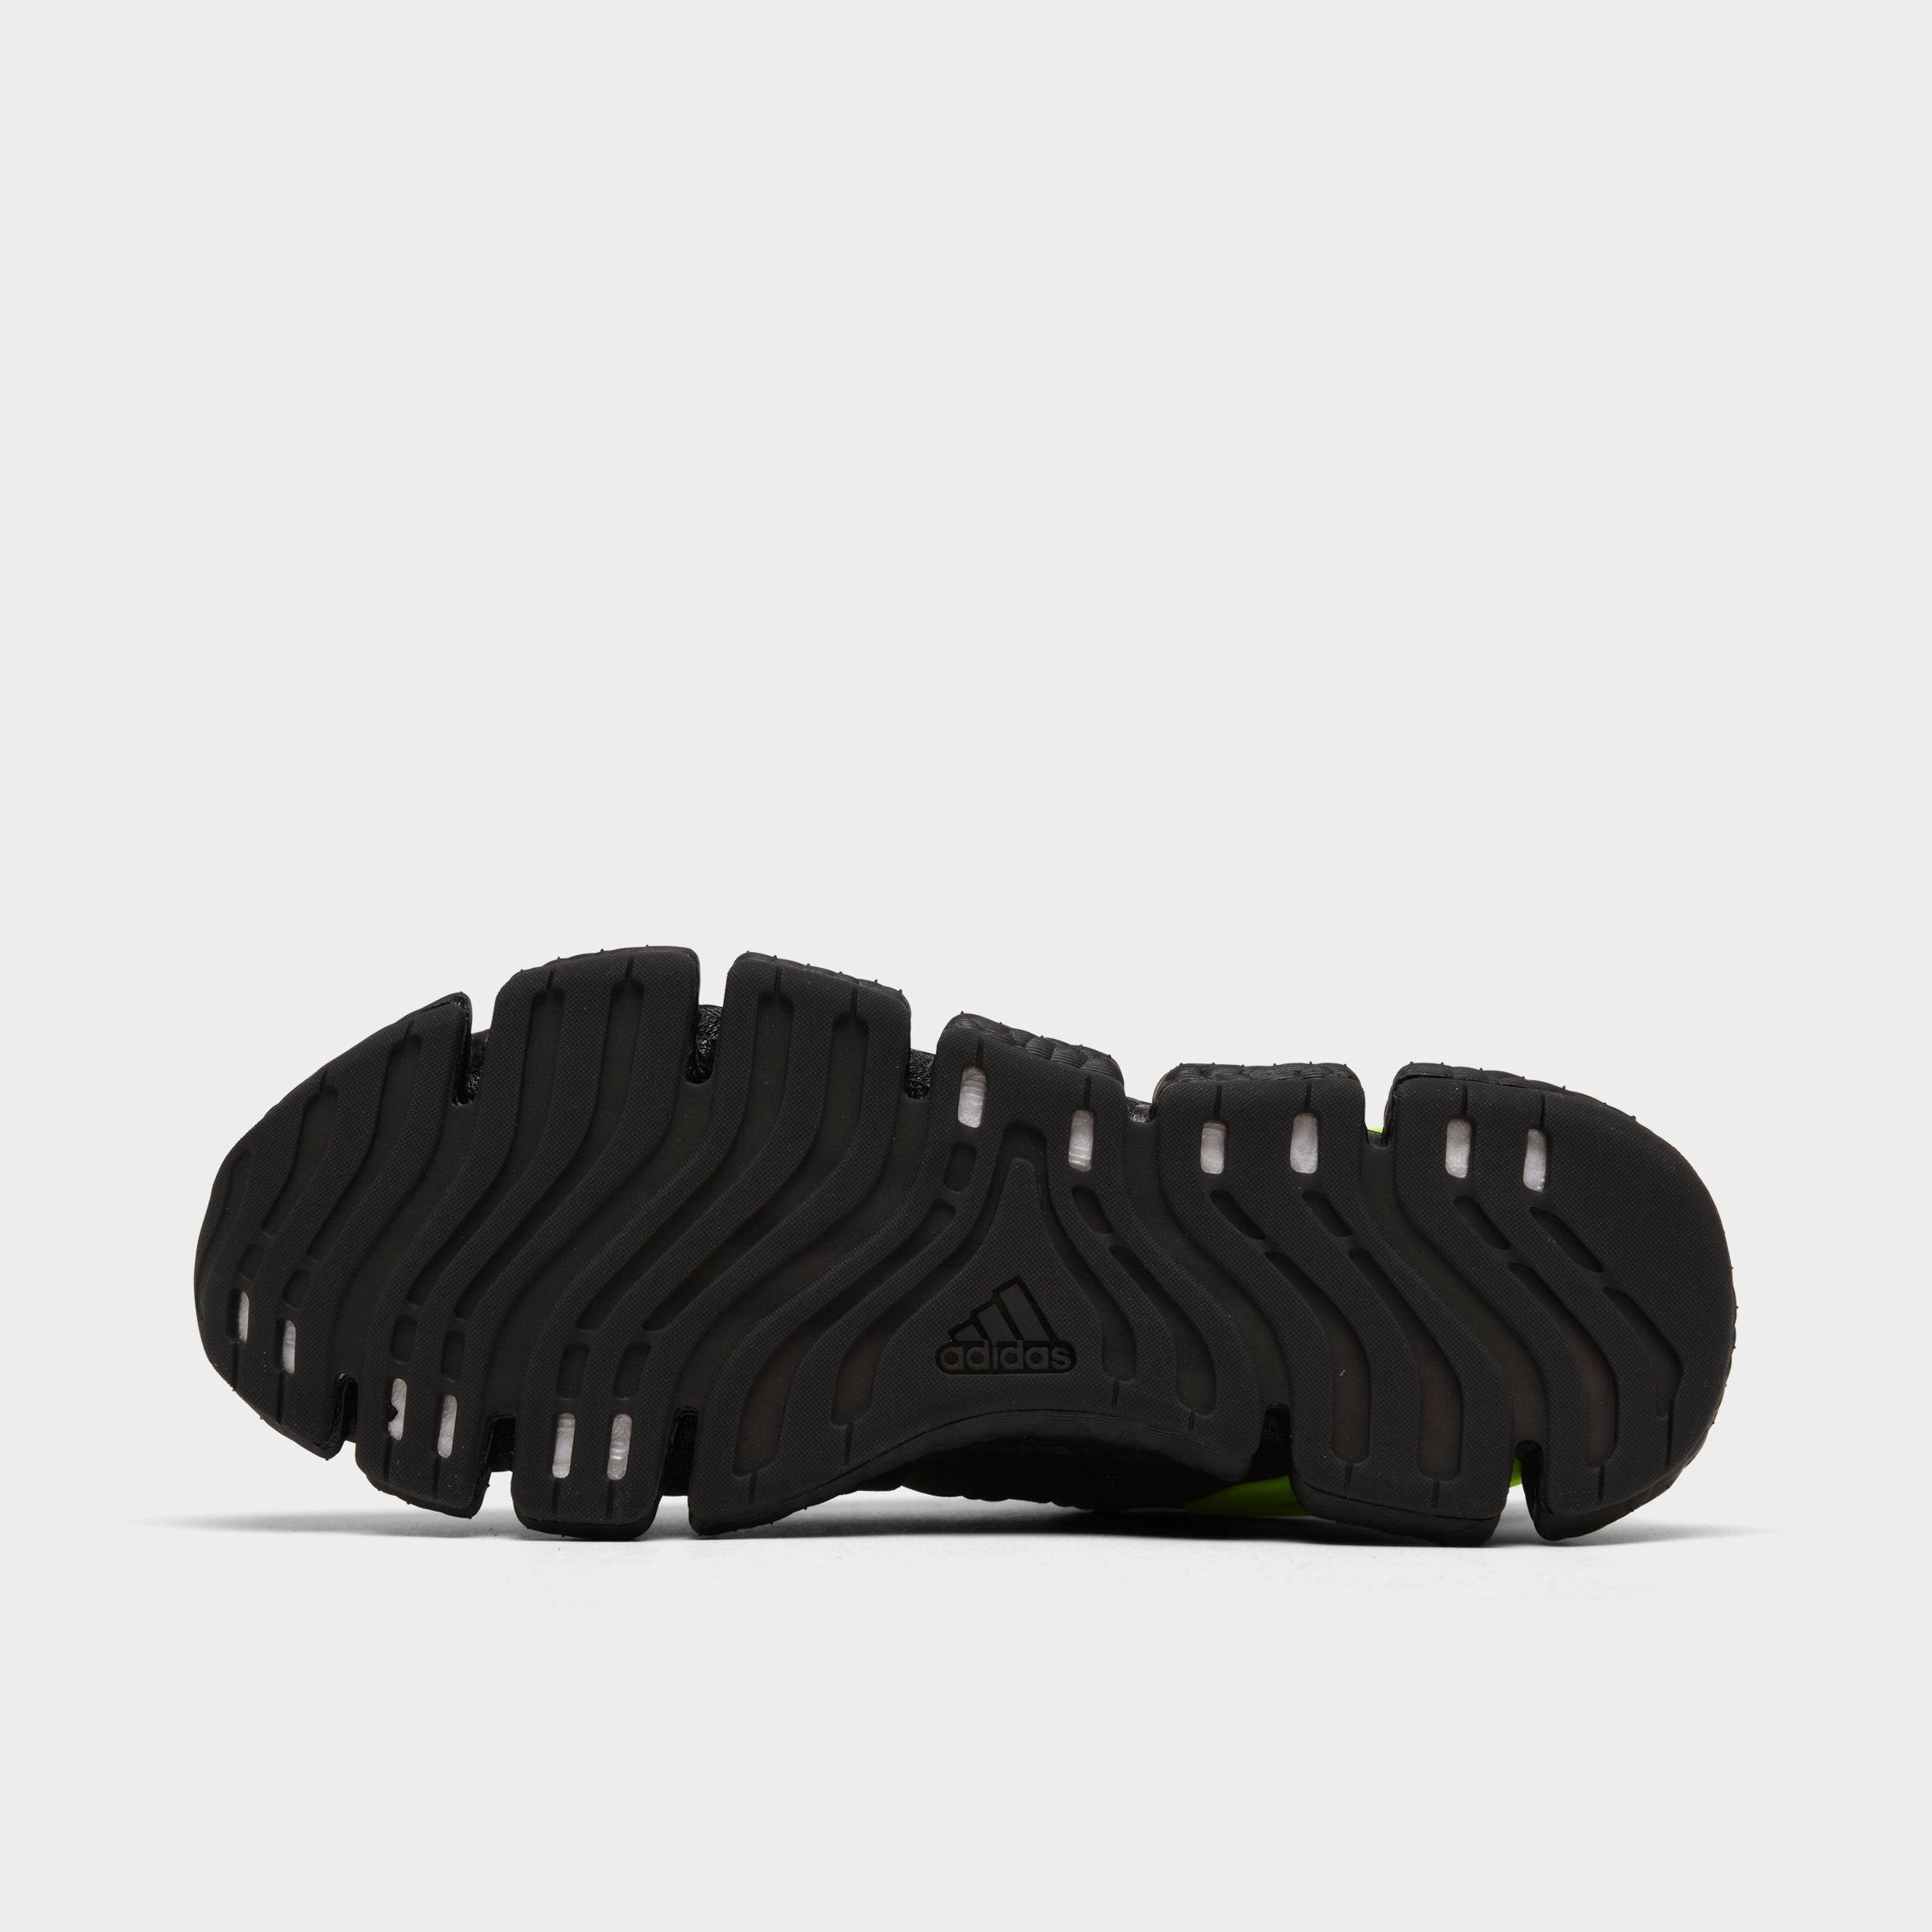 adidas climacool 5 shoes online